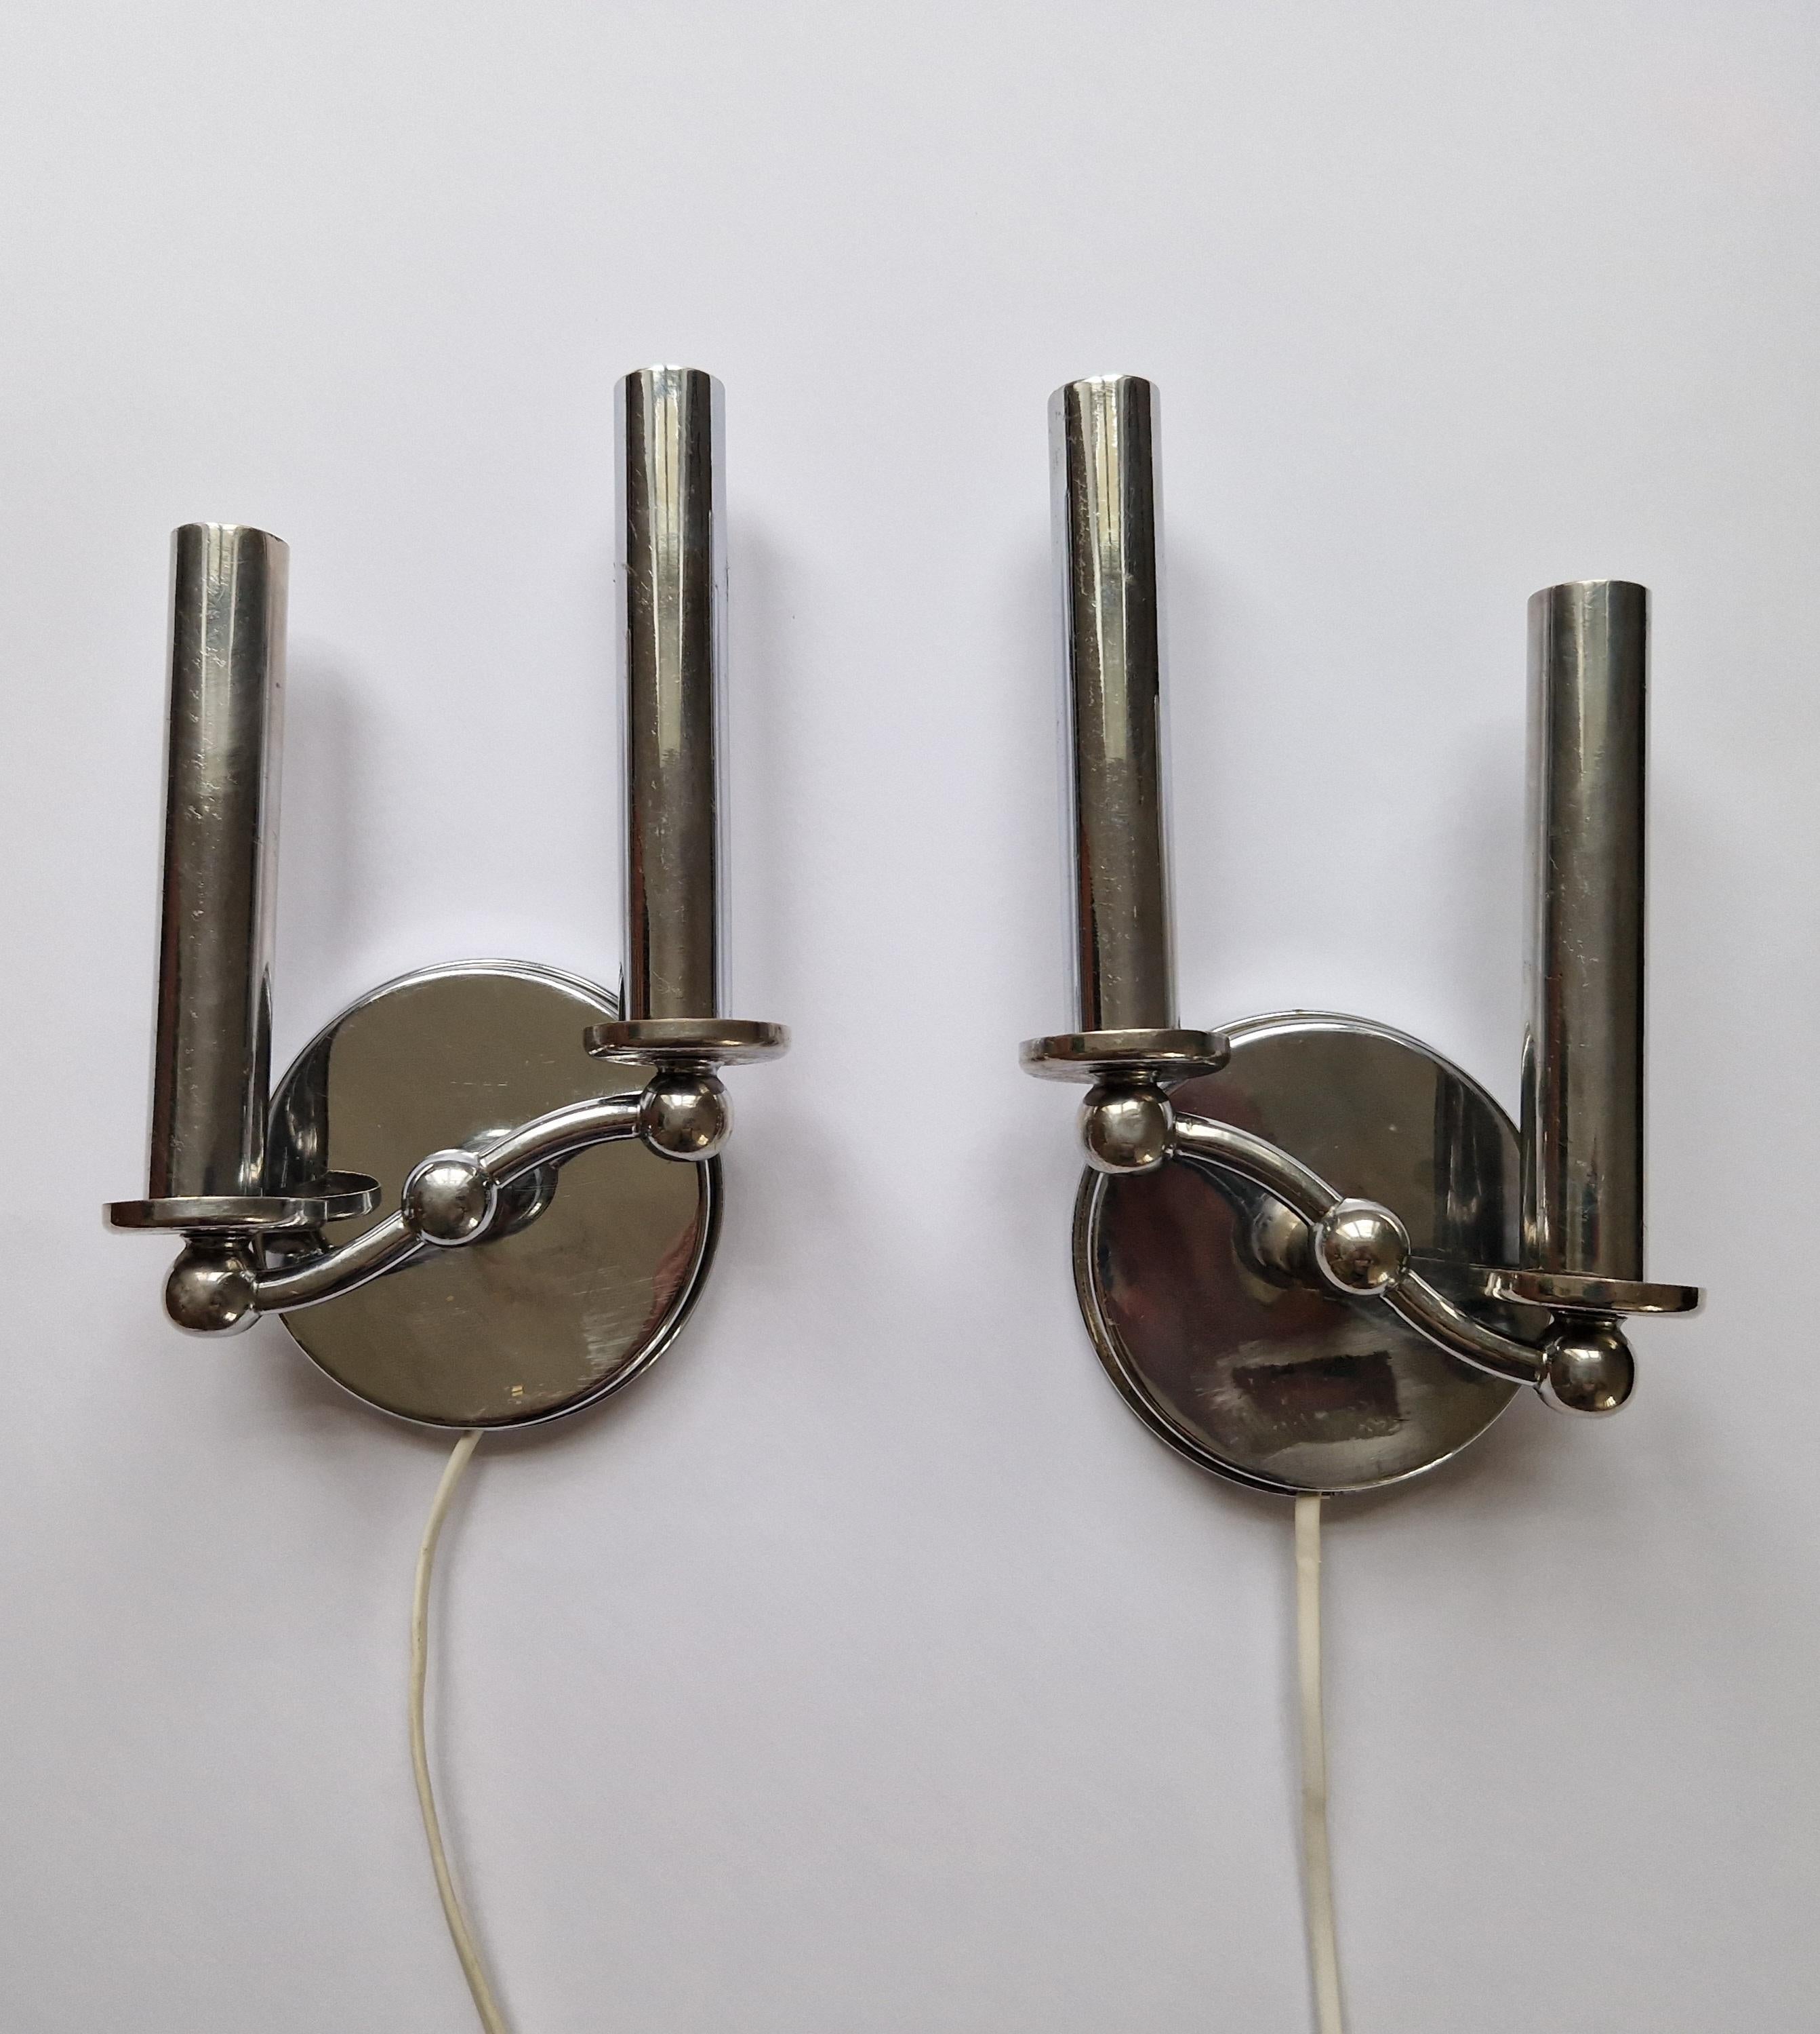 Pair of Rare Chrome Art Deco / Functionalism Wall Lamps, 1930s For Sale 1